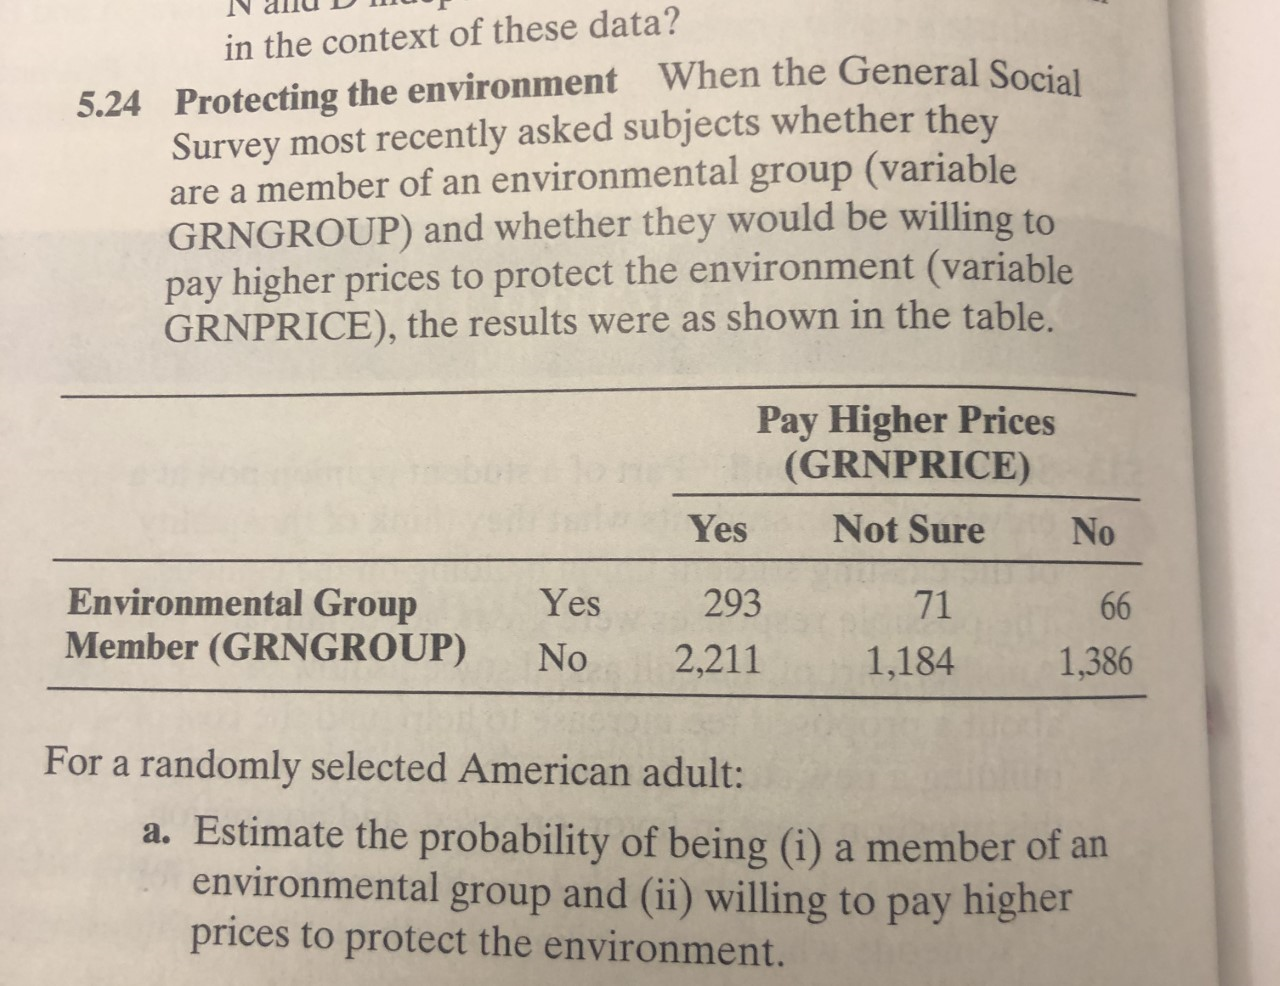 in the context of these data?
5.24 Protecting the environment When the General Social
Survey most recently asked subjects whether they
are a member of an environmental group (variable
GRNGROUP) and whether they would be willing to
pay higher prices to protect the environment (variable
GRNPRICE), the results were as shown in the table.
Pay Higher Prices
(GRNPRICE)
Yes
Not Sure
No
Environmental Group
Member (GRNGROUP)
Yes
293
71
66
No
2,211
1,184
1,386
For a randomly selected American adult:
a. Estimate the probability of being (i) a member of an
environmental group and (ii) willing to pay higher
prices to protect the environment.
